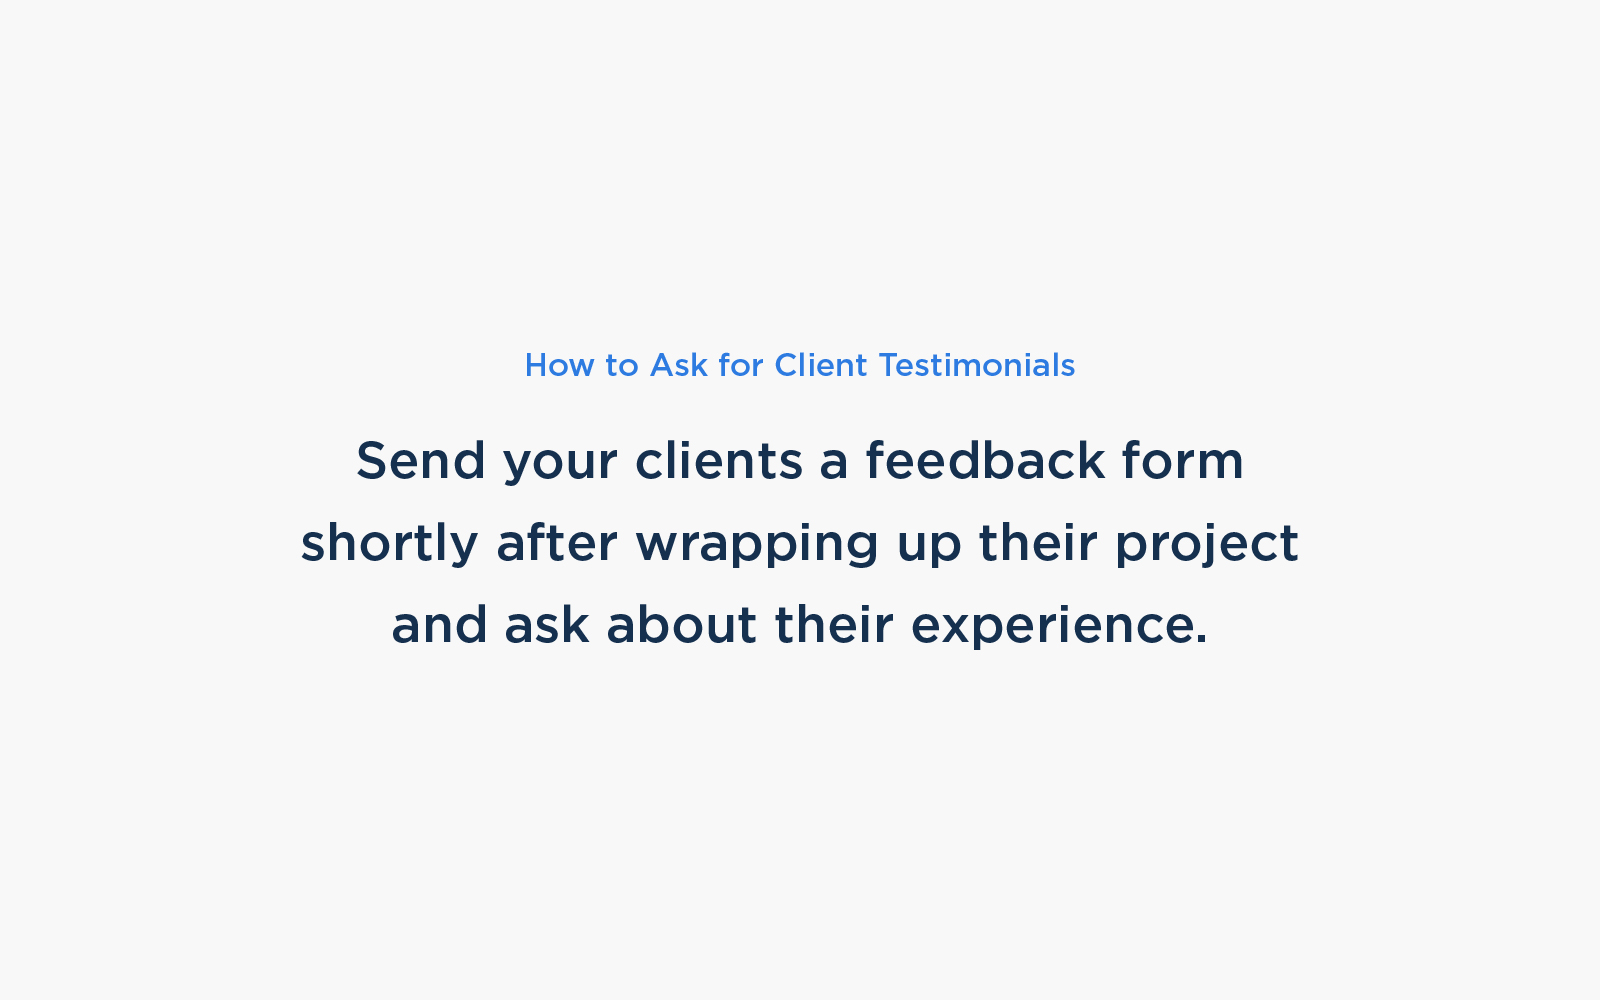 Send your clients a feedback form after wrapping up their project and ask about their experience.